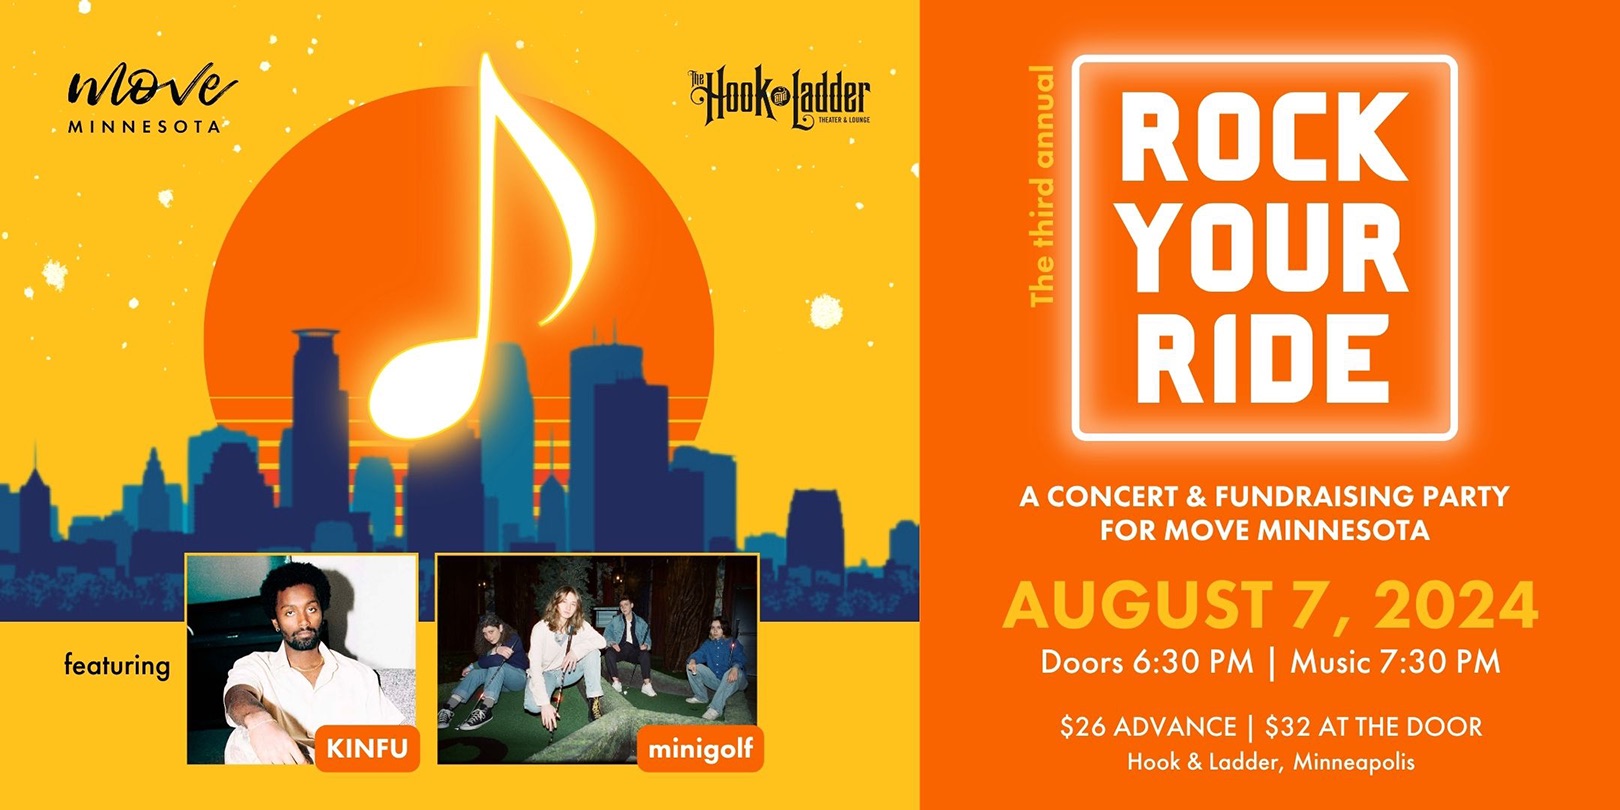 The Third Annual ‘Rock Your Ride’- A Concert and Fundraising Party for Move Minnesota featuring KINFU and minigolf Wednesday, August 7 The Hook and Ladder Theater Doors 6:30pm :: Music 7:30pm :: 21+ GA: $26 ADV / $32 DOS NO REFUNDS